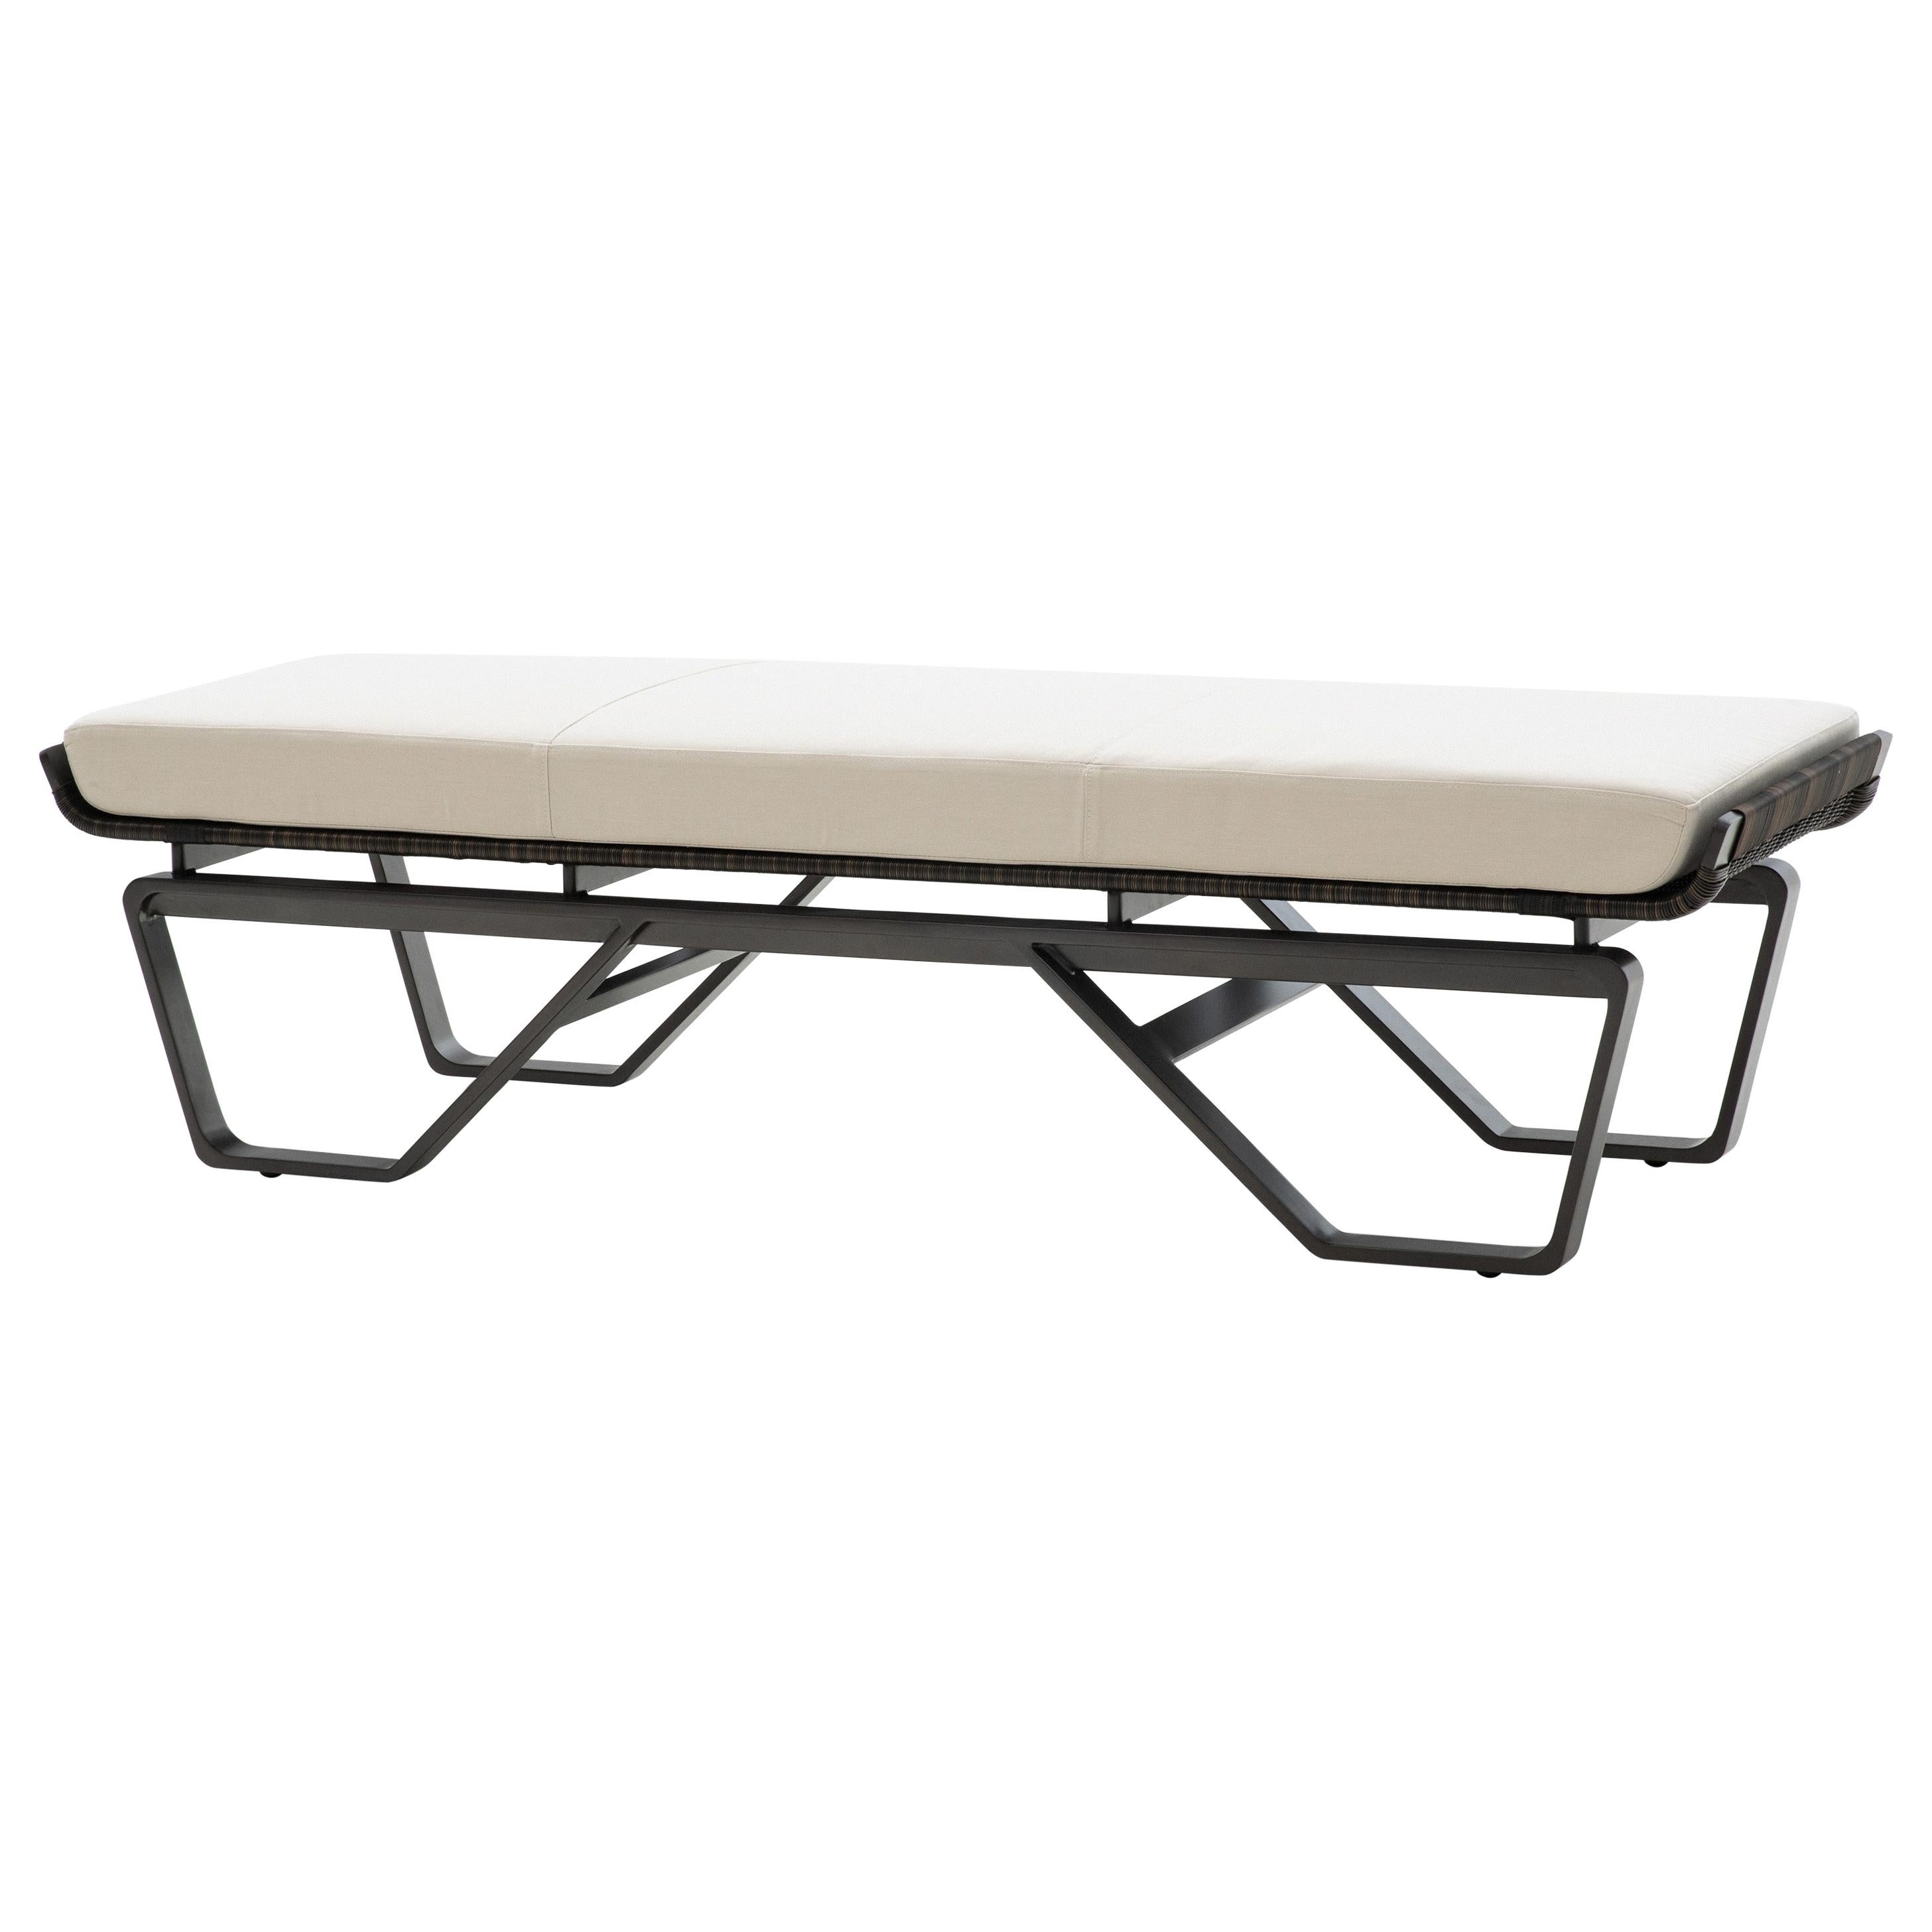 HOLLY HUNT Outdoor Meduse Bench with Basalt Base Finish & Canvas